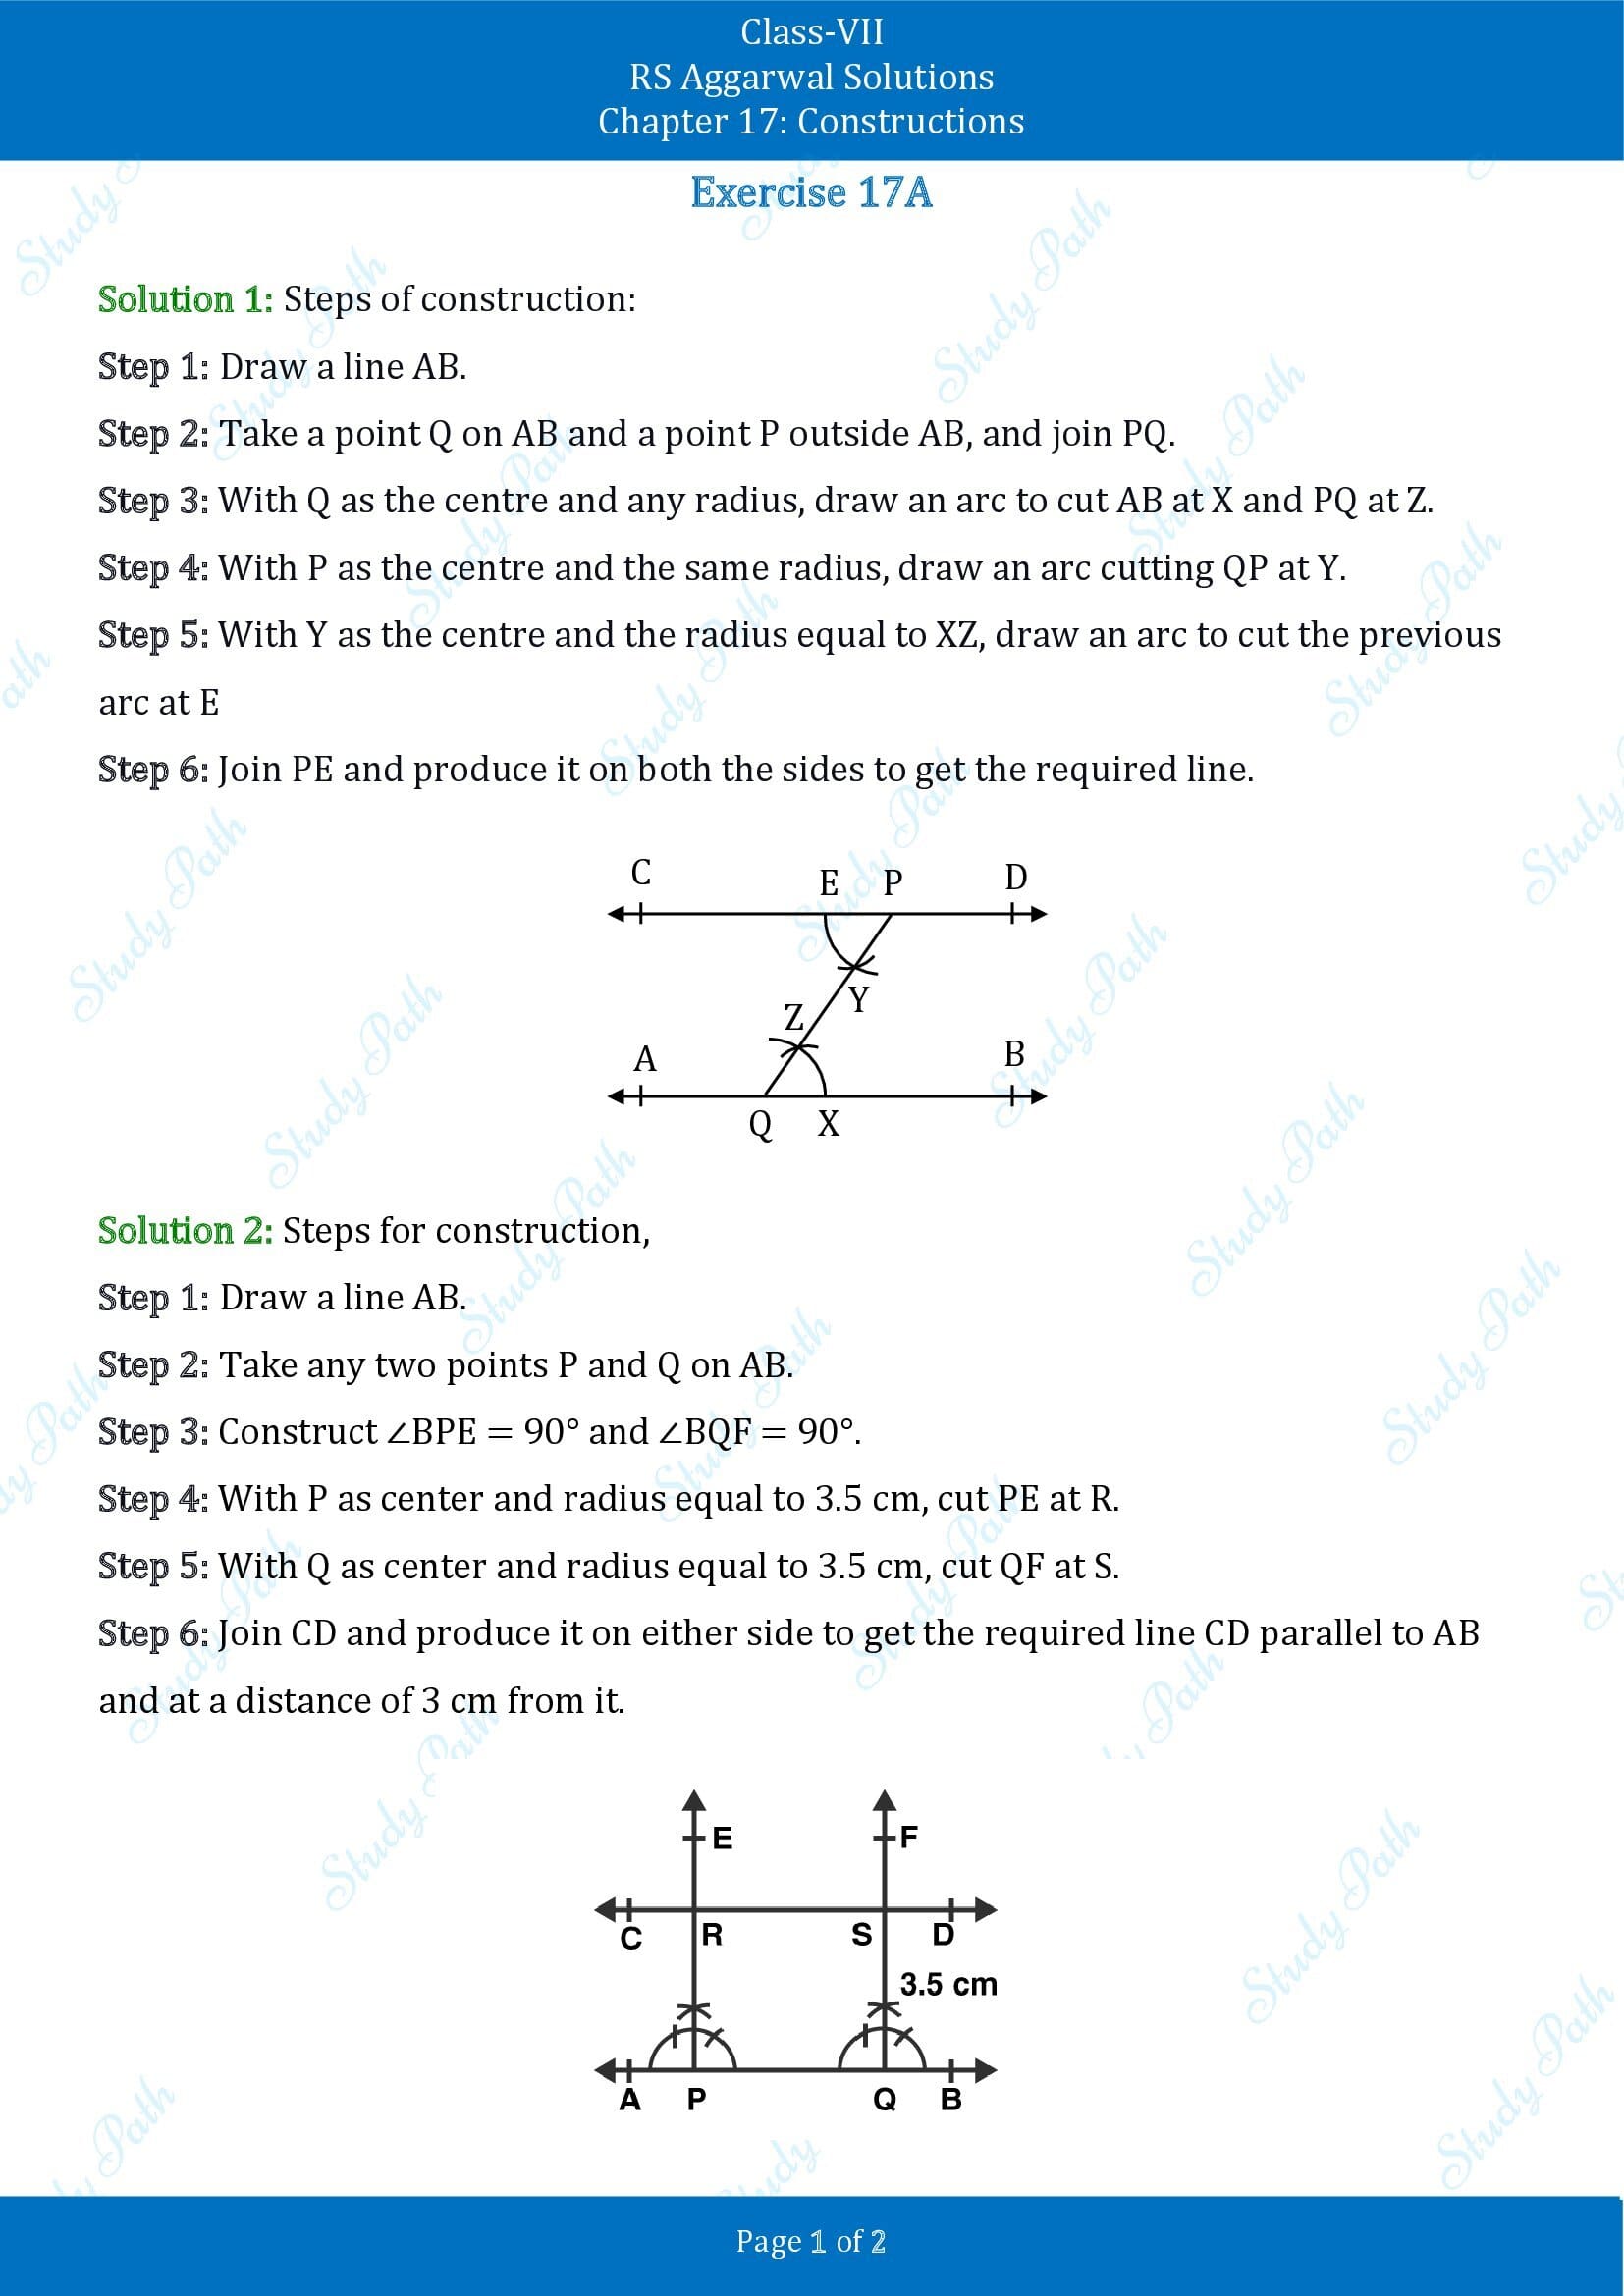 RS Aggarwal Solutions Class 7 Chapter 17 Constructions Exercise 17A 00001